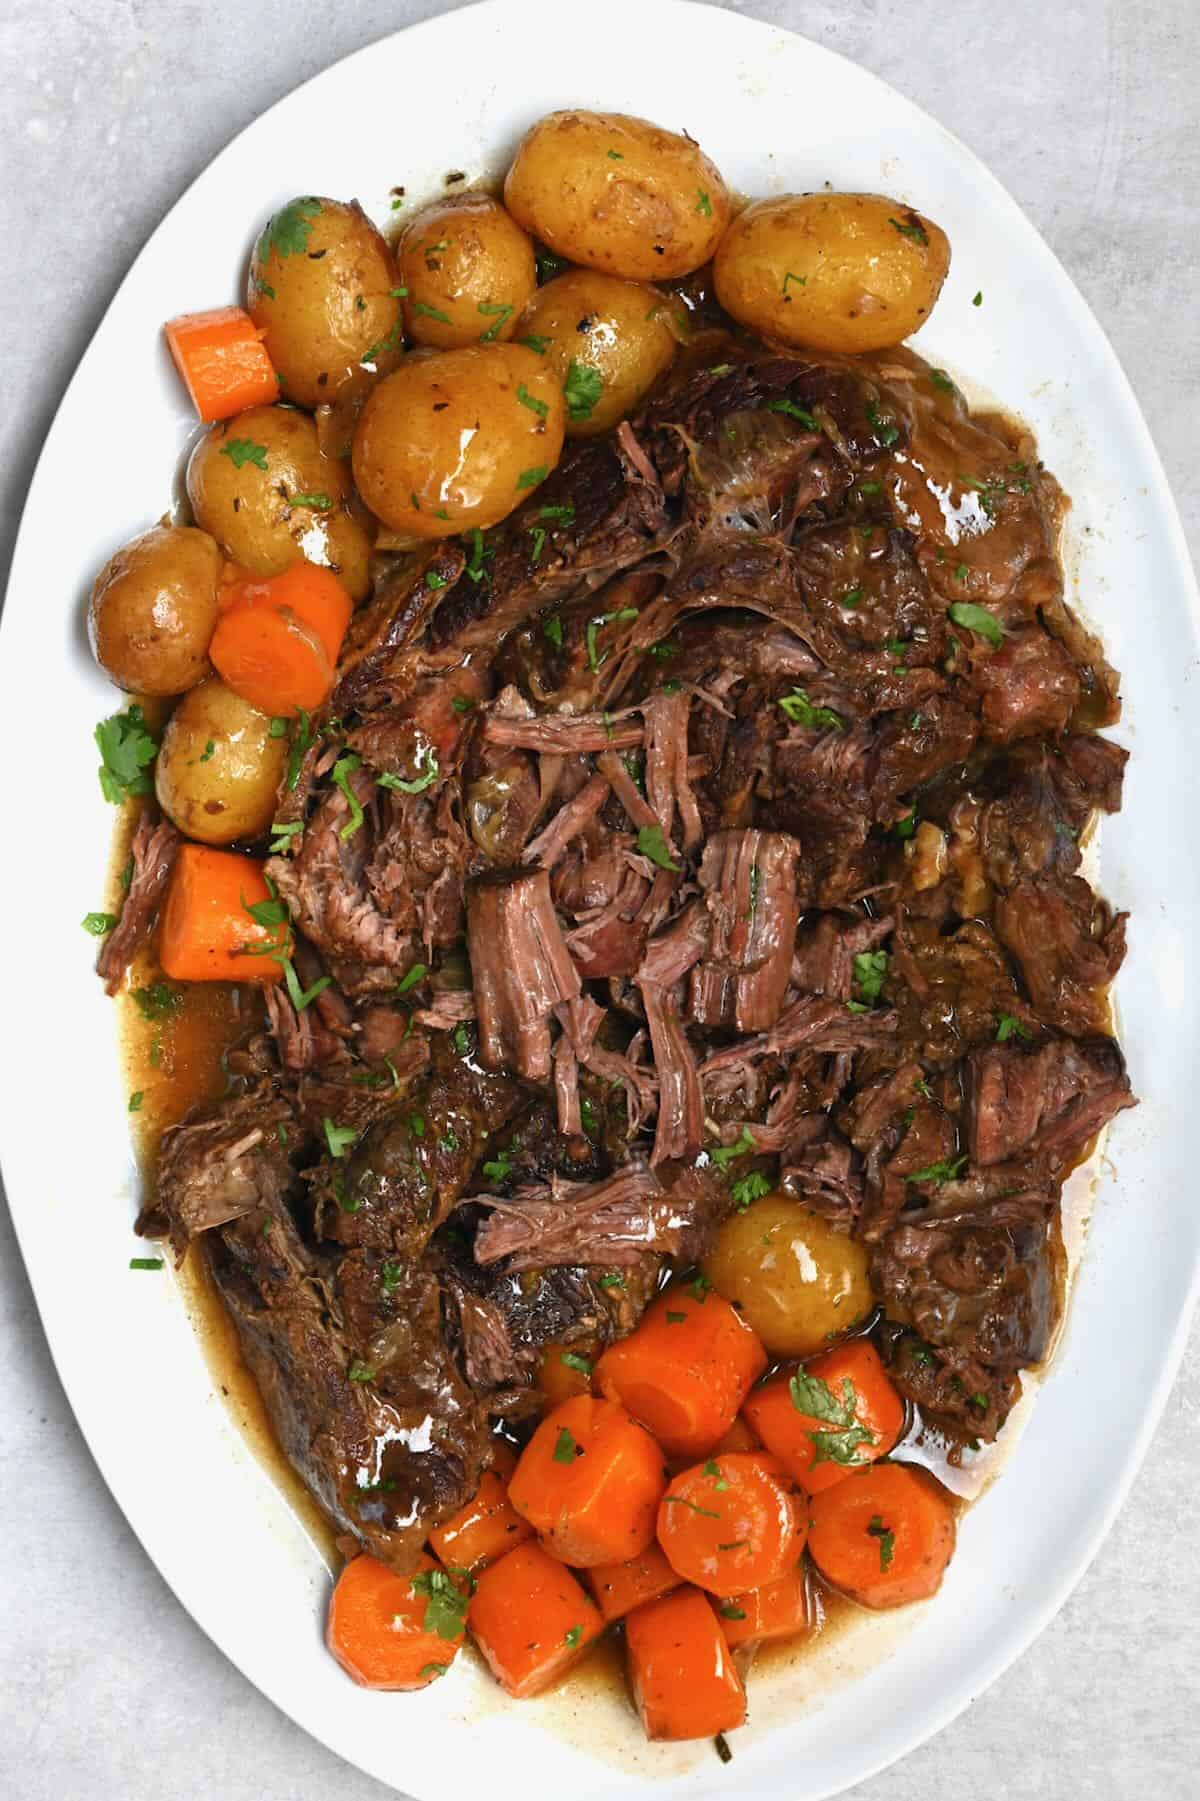 https://www.alphafoodie.com/wp-content/uploads/2023/10/Crock-pot-roast-dinner-on-a-white-plate-with-carrots-and-potatoes.jpeg